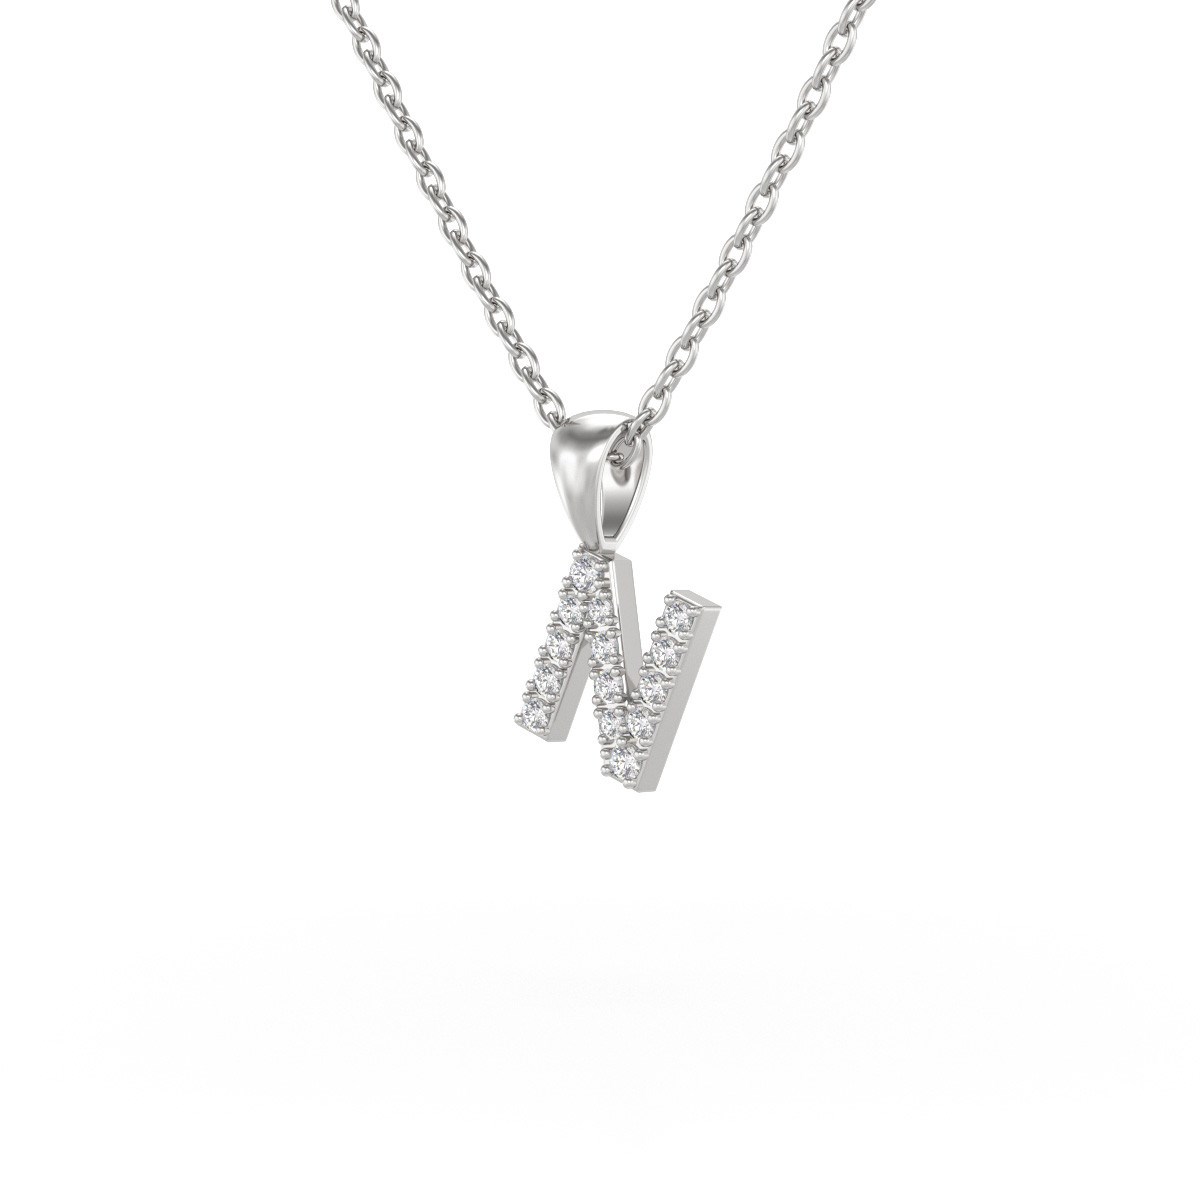 Collier Pendentif ADEN Lettre N Or 750 Blanc Diamant Chaine Or 750 incluse 0.72grs - vue 3